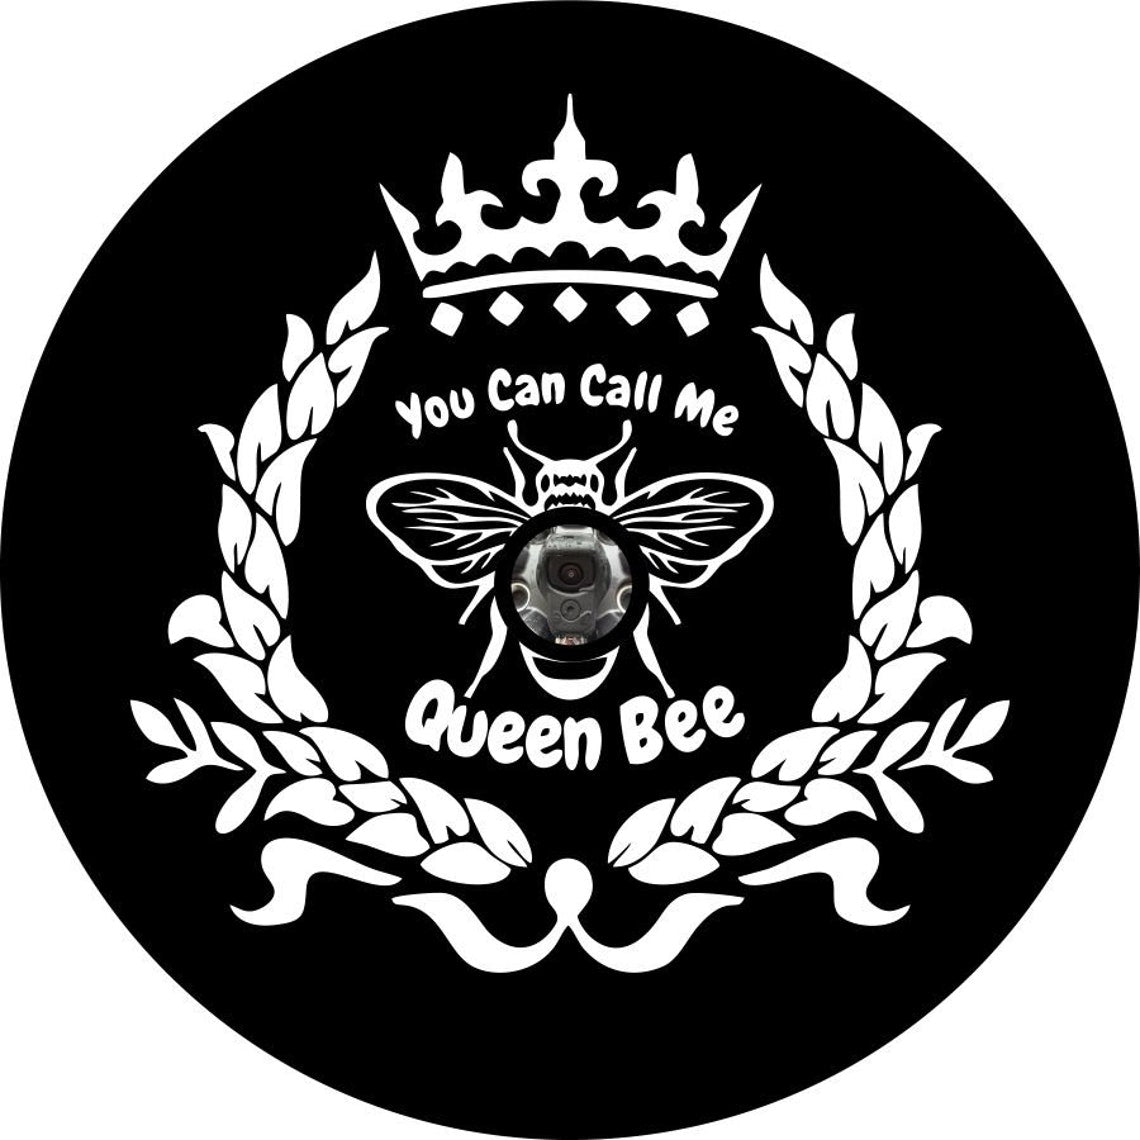 You can call me queen bee insignia design spare tire cover for Jeep, RV, Bronco, Camper, Trailer, and more on black vinyl with back up camera